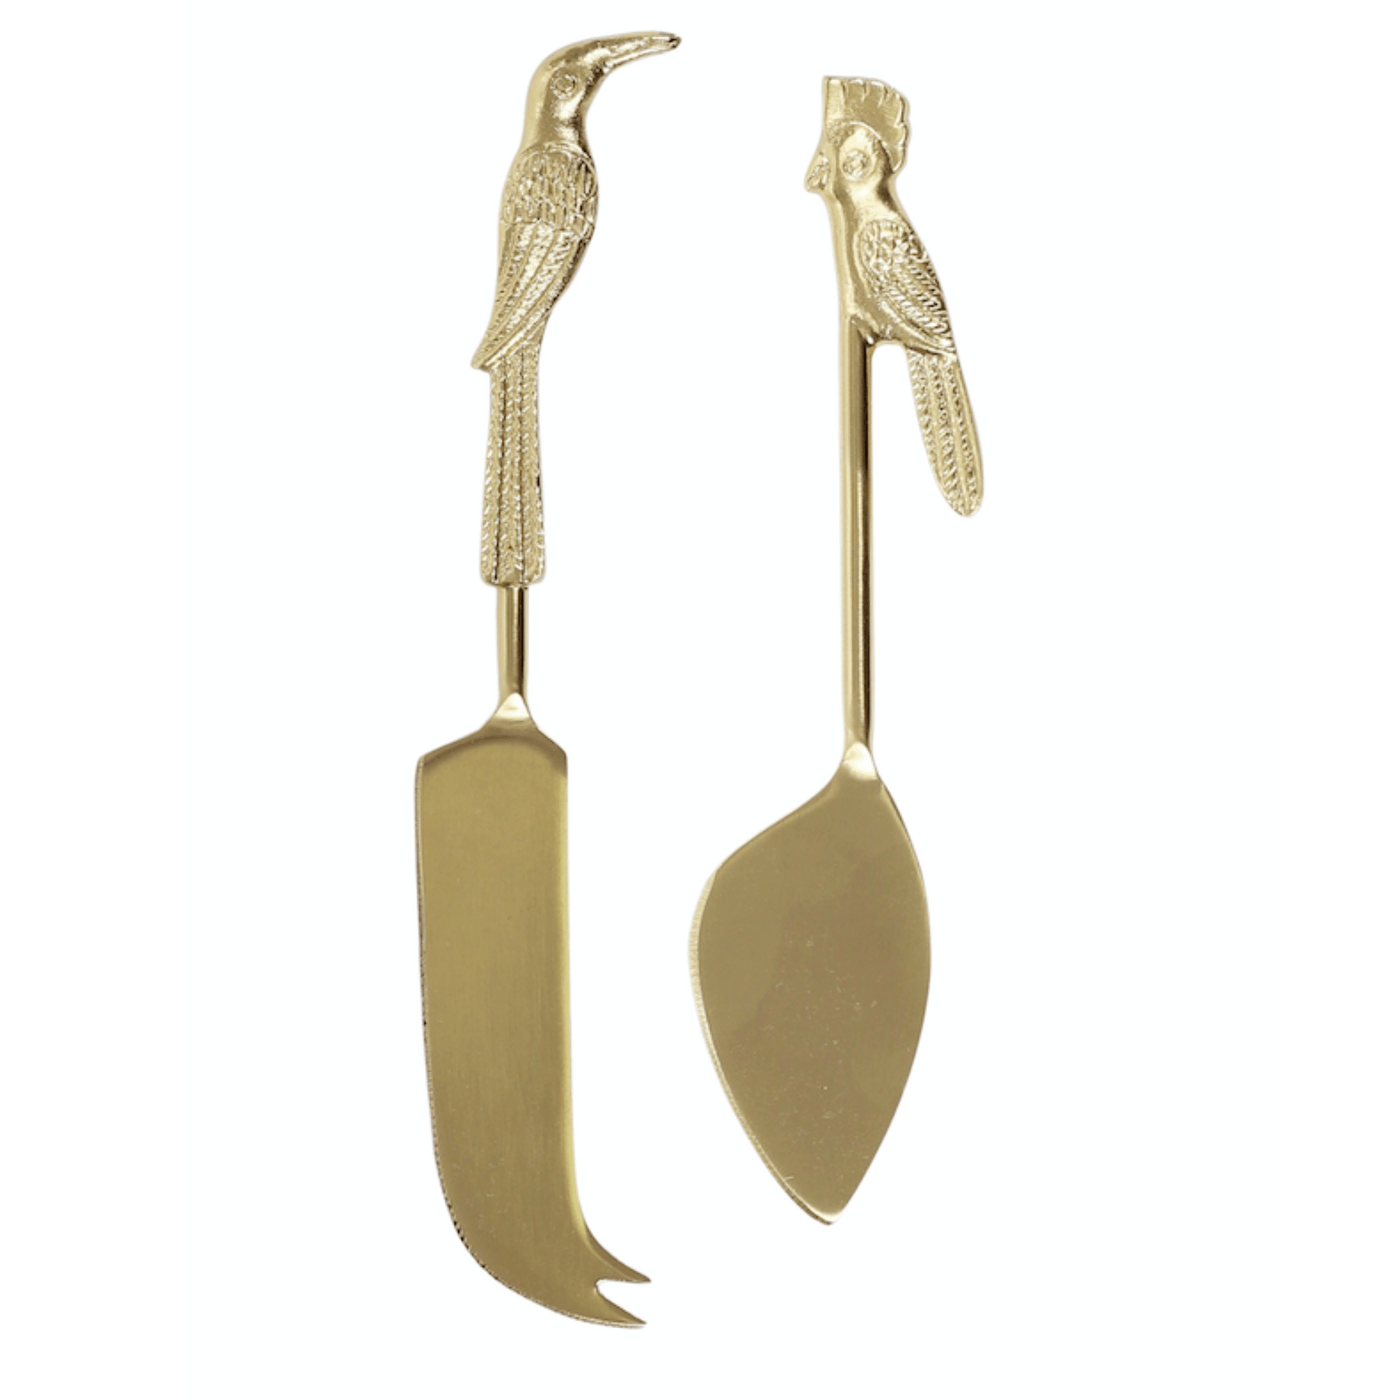 Parrot Brass Cheese Knives Set